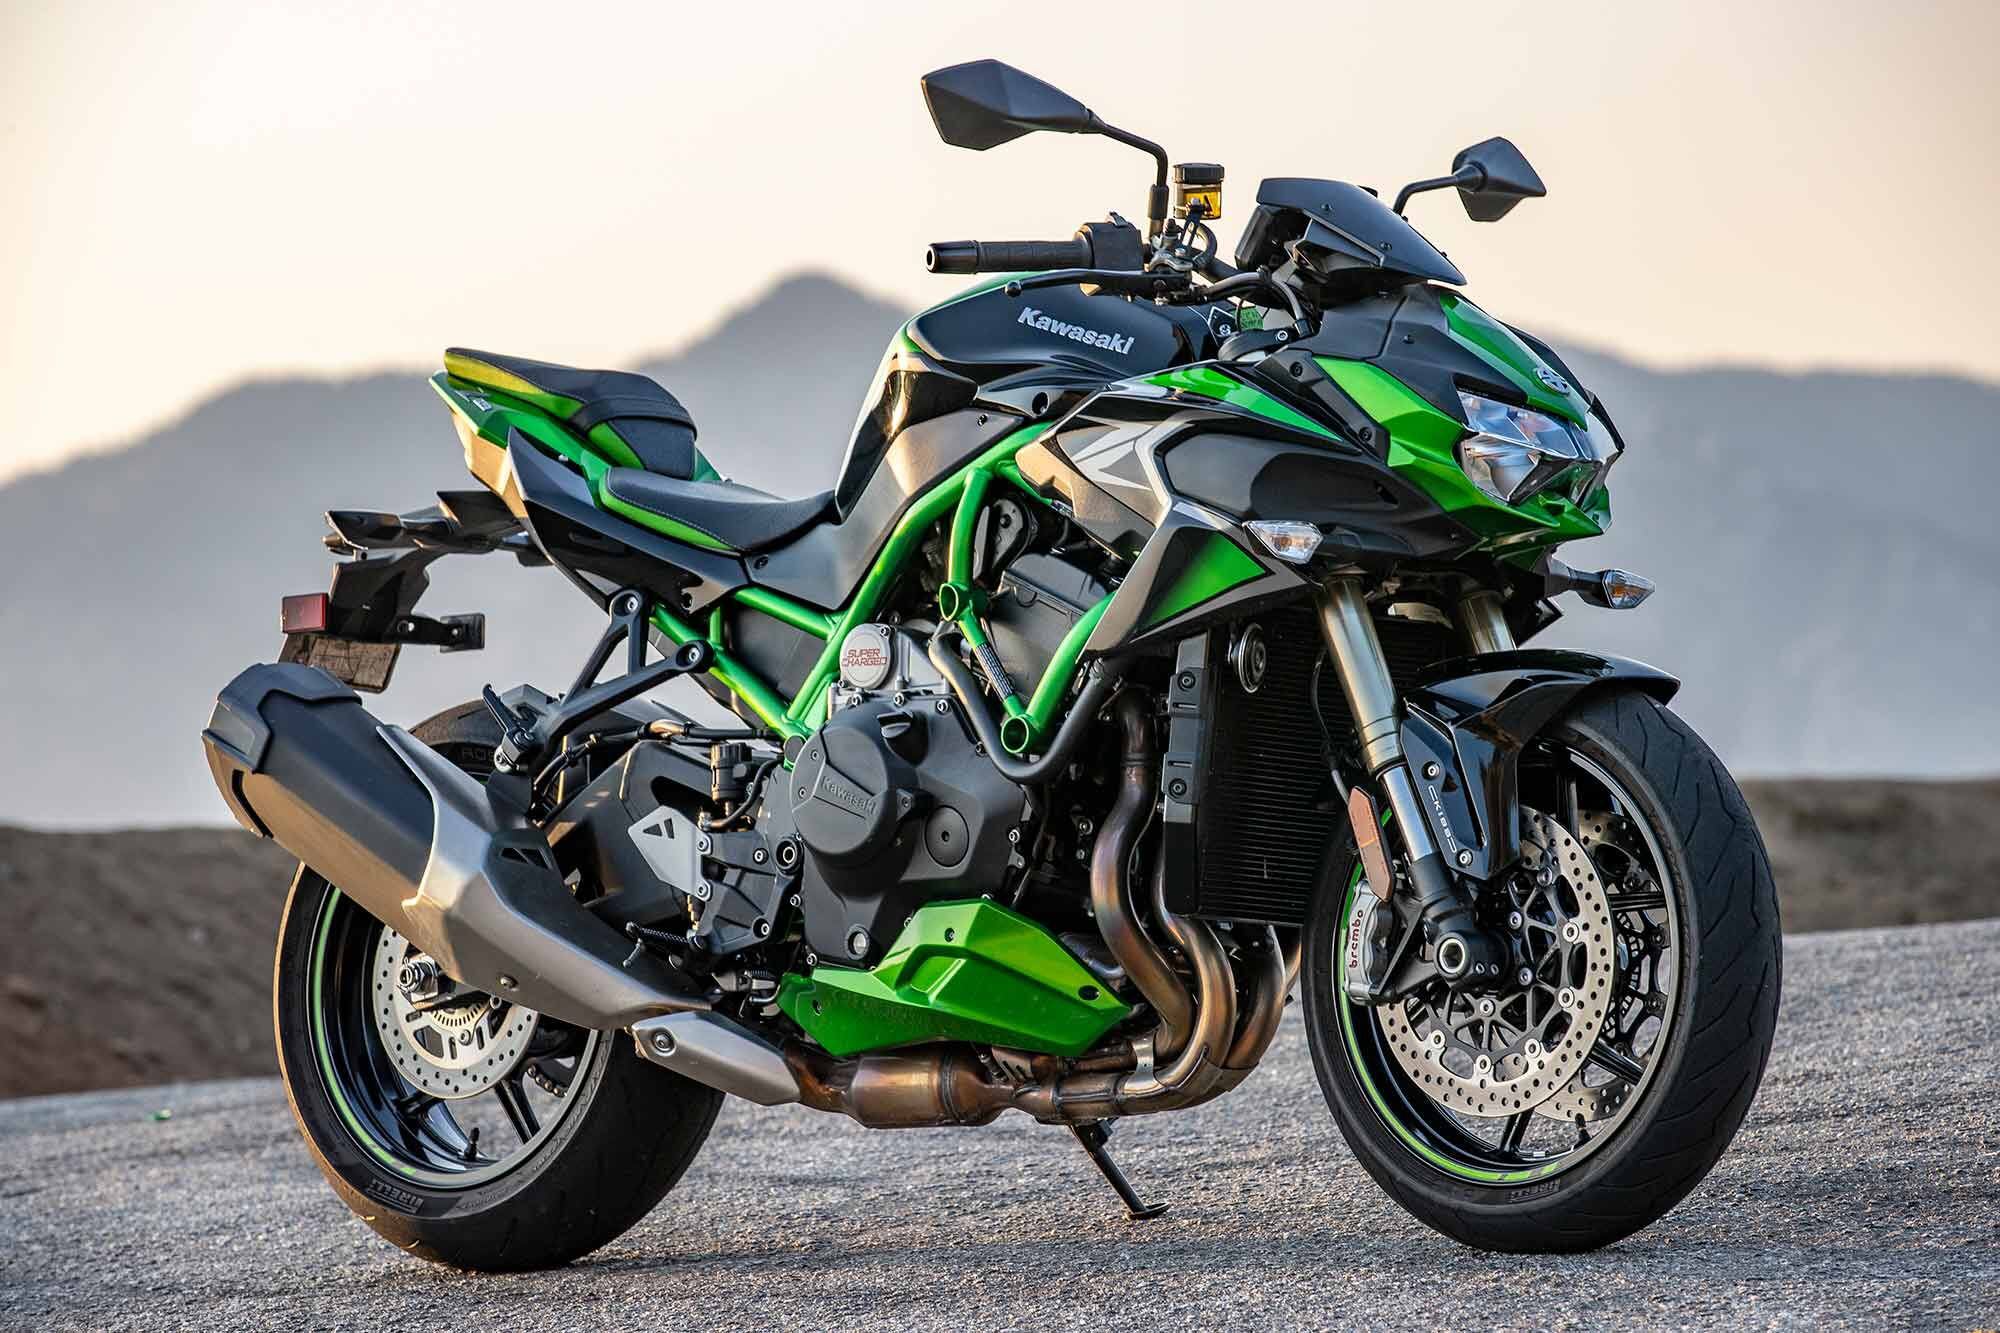 Kawasaki’s Z H2 SE gets Showa Skyhook electronic suspension and Brembo Stylema calipers for $2,200 more than the standard model.